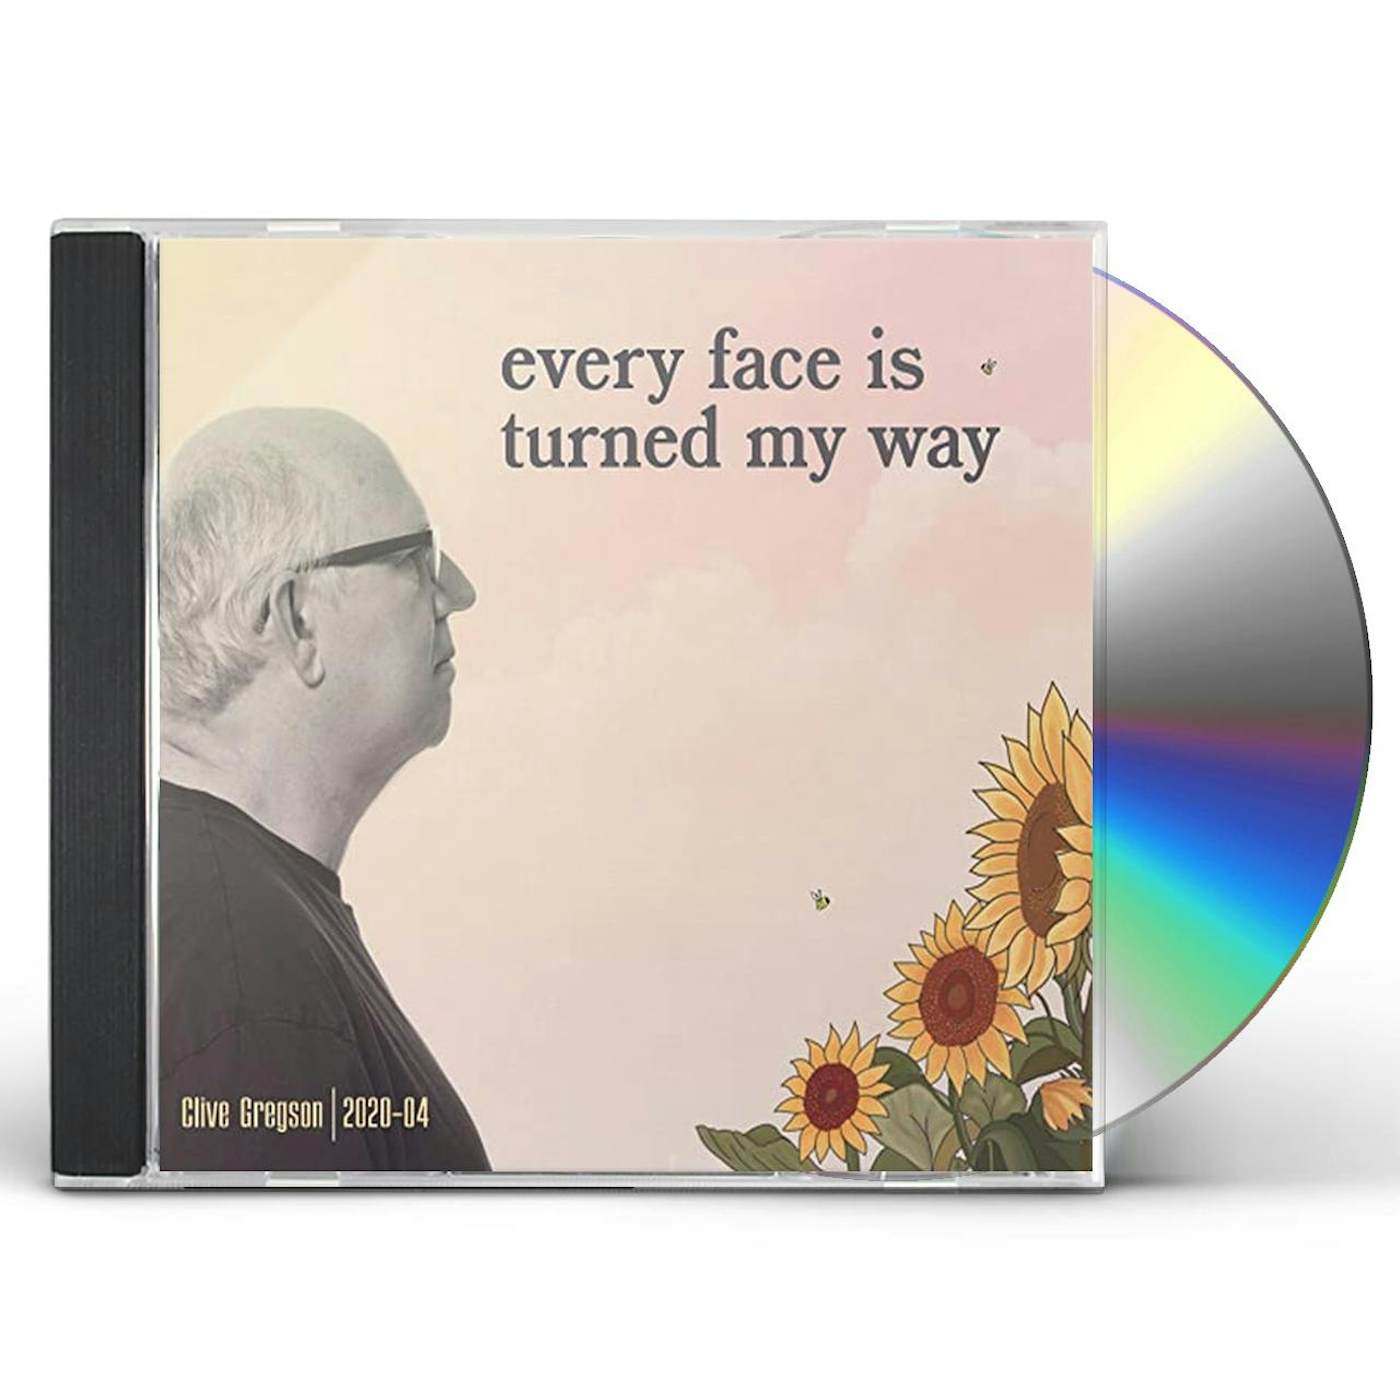 Clive Gregson EVERY FACE IS TURNED MY WAY (2020-04) CD